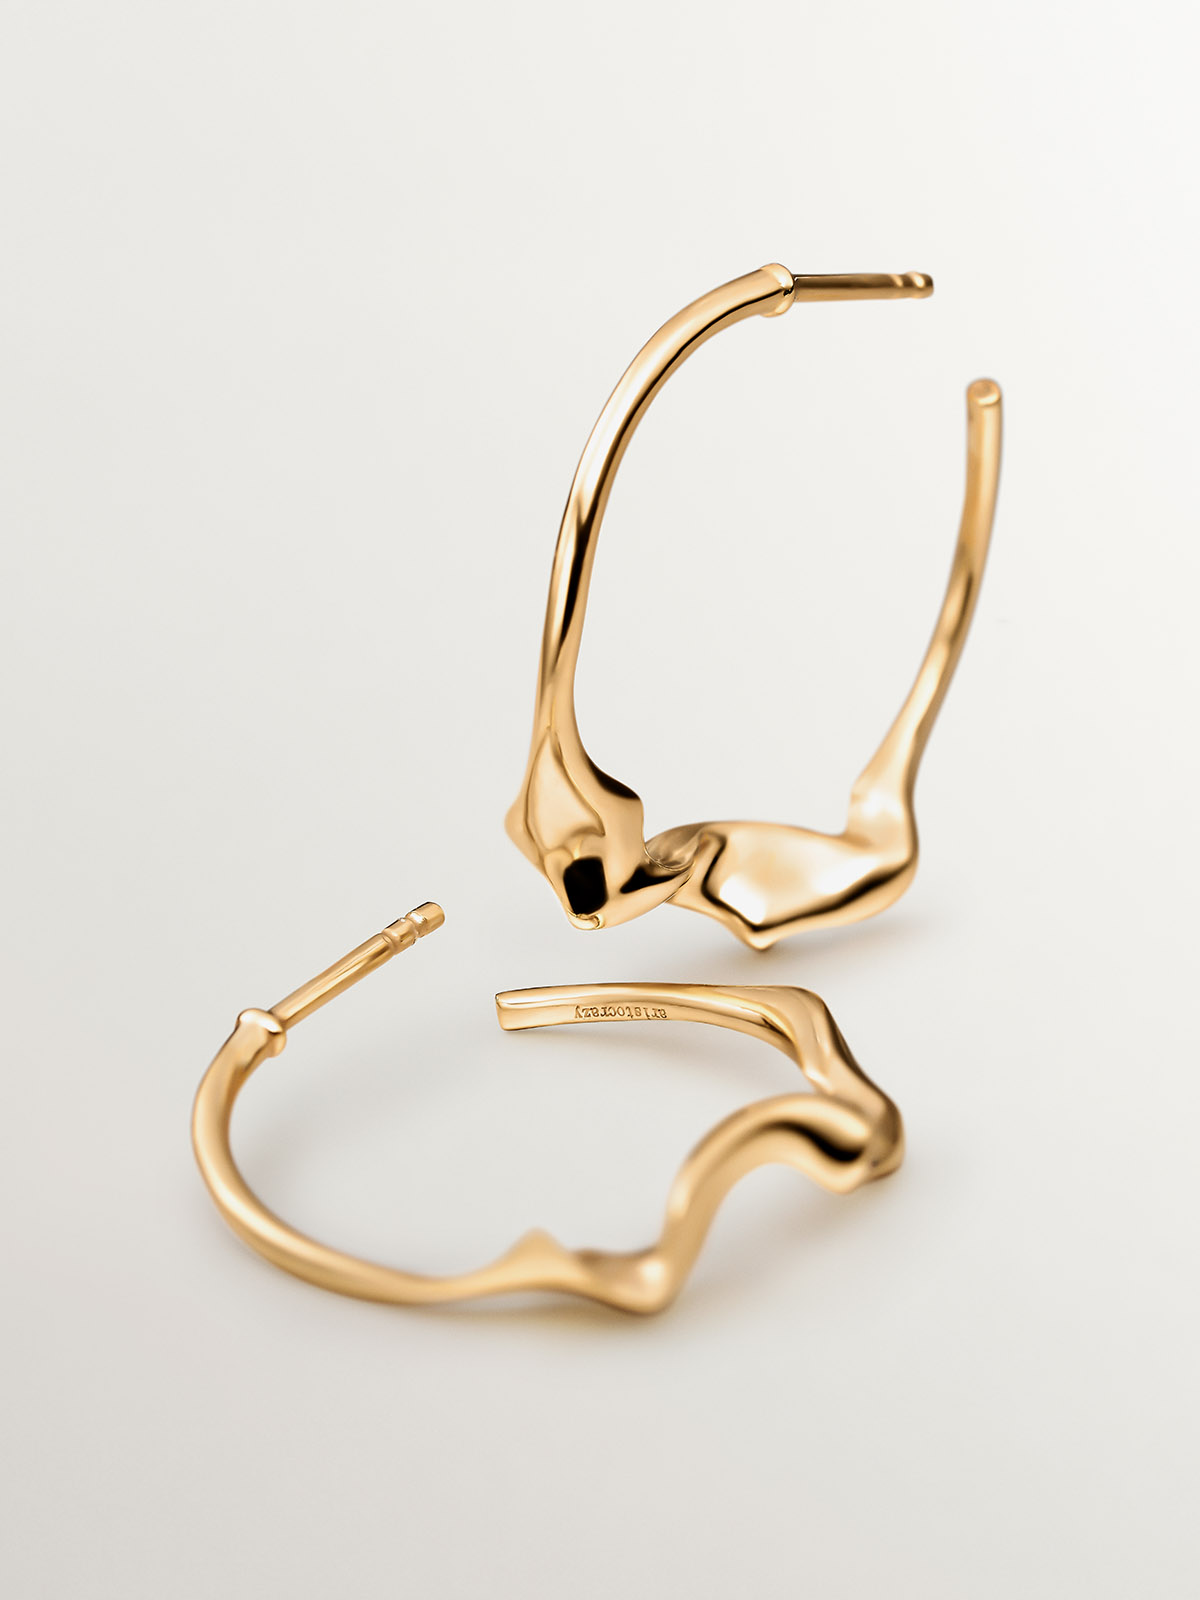 Large irregular hoop earrings made of 925 silver covered in 18K yellow gold